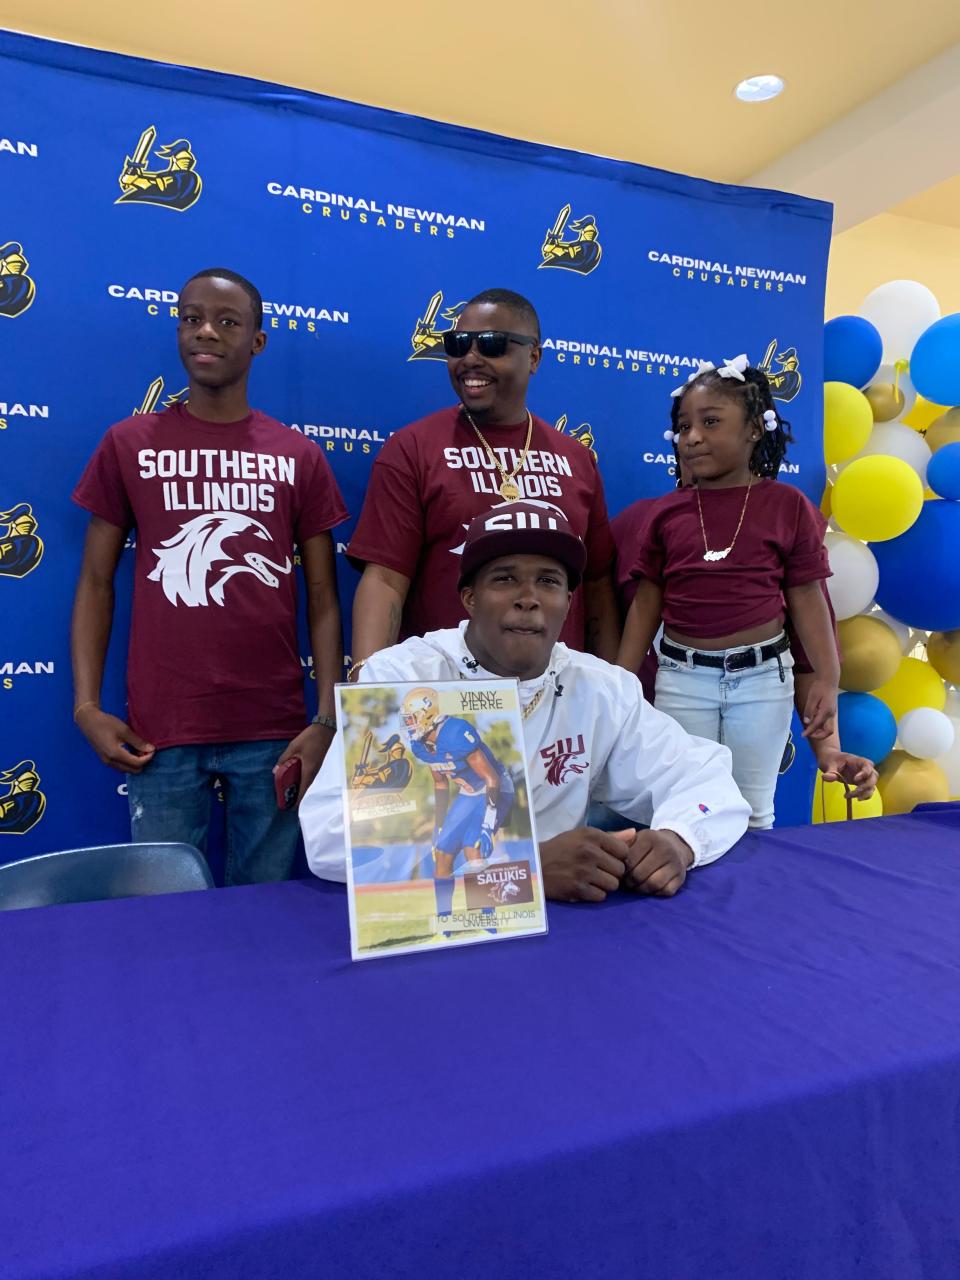 Vinkevus 'Vinny' Pierre put pen to paper on national signing day and made it official with Southern Illinois.